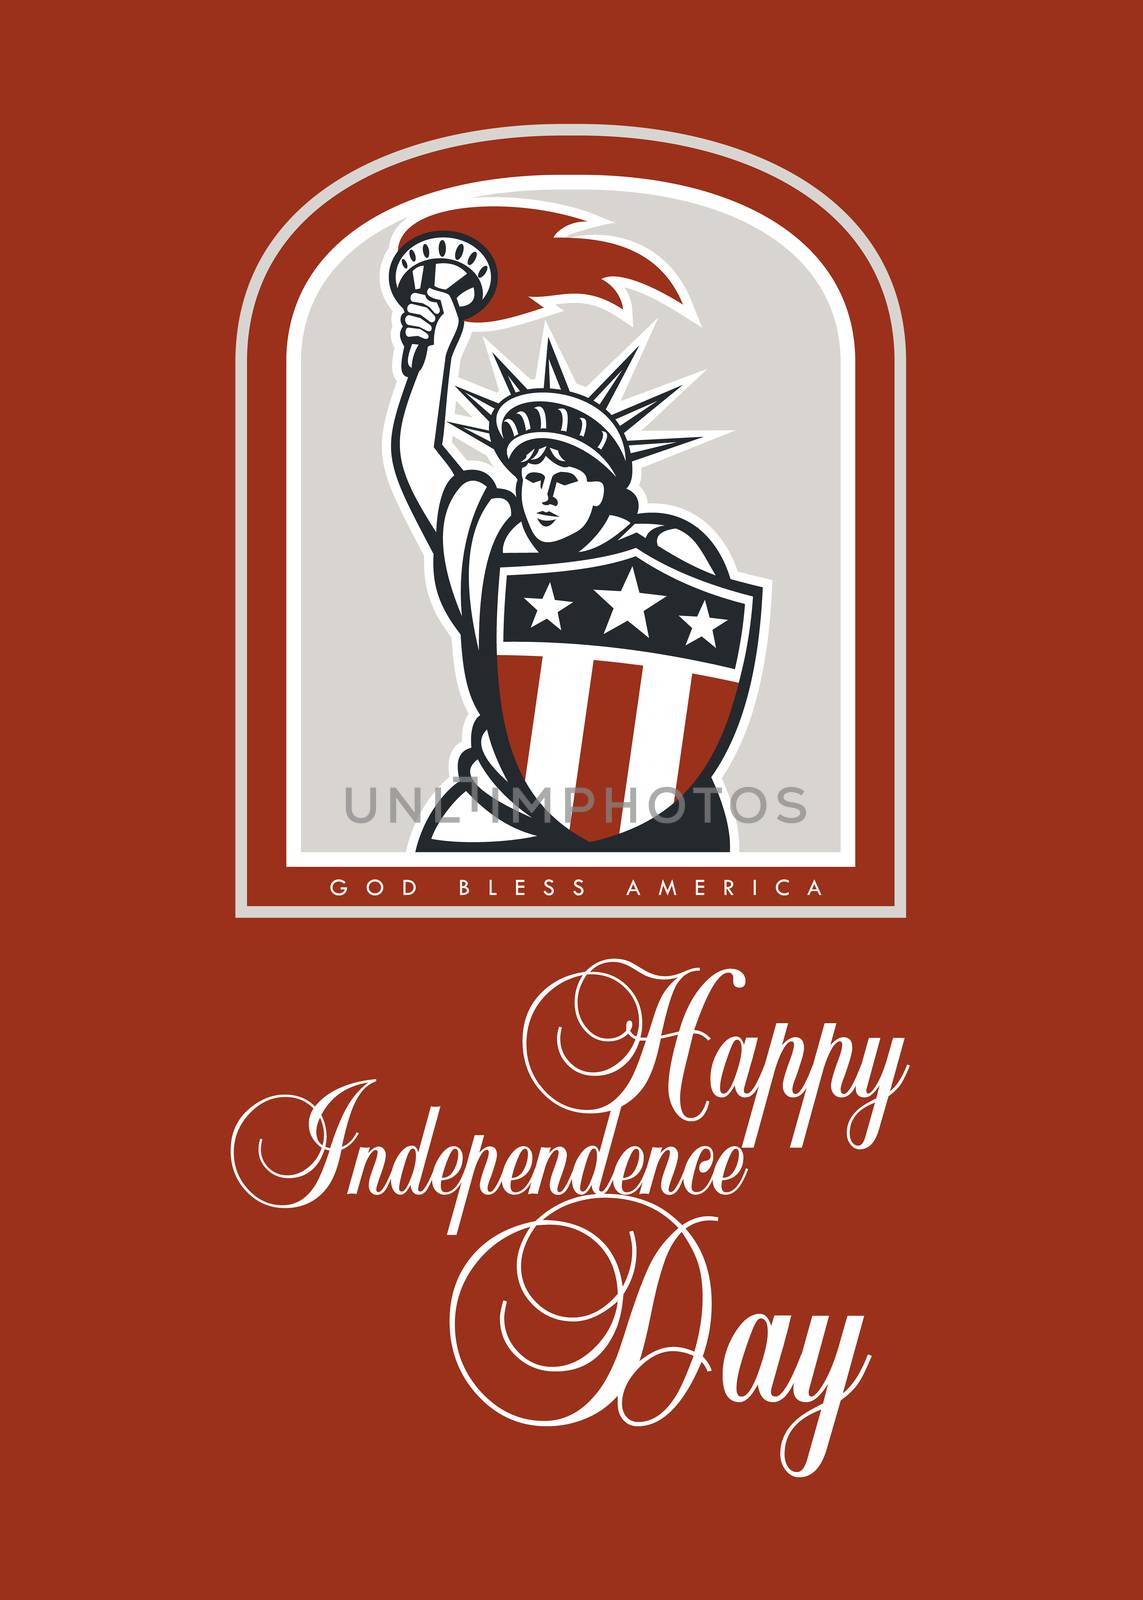 Independence Day or 4th of July greeting card featuring an illustration of statue of liberty holding up a flaming torch and shield on isolated background done in retro style with the words God Bless America and Happy Independence Day. 